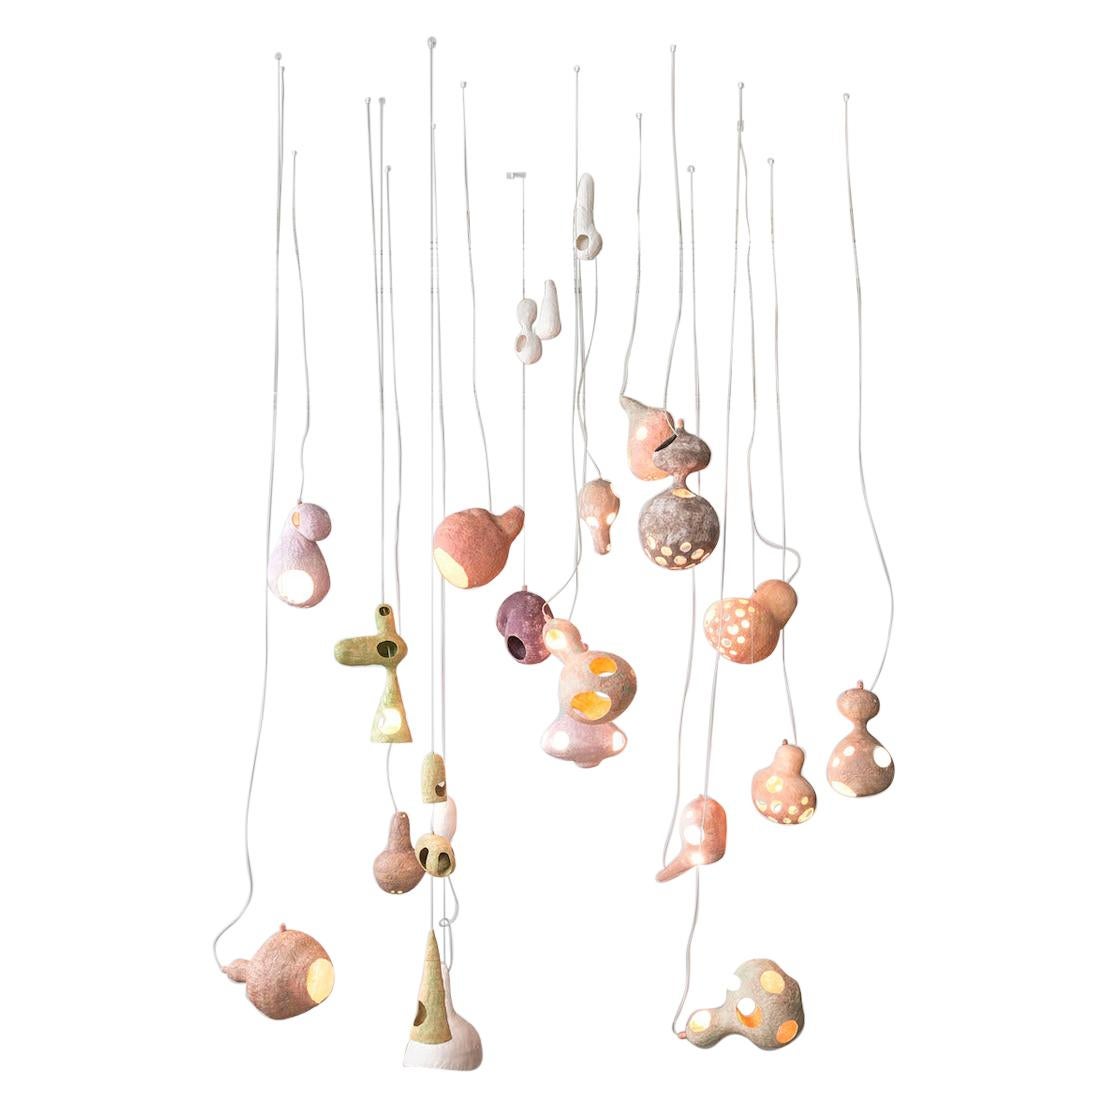 You See a Sheep Contemporary Chandelier with Multiple Hand-Built Ceramic Shells